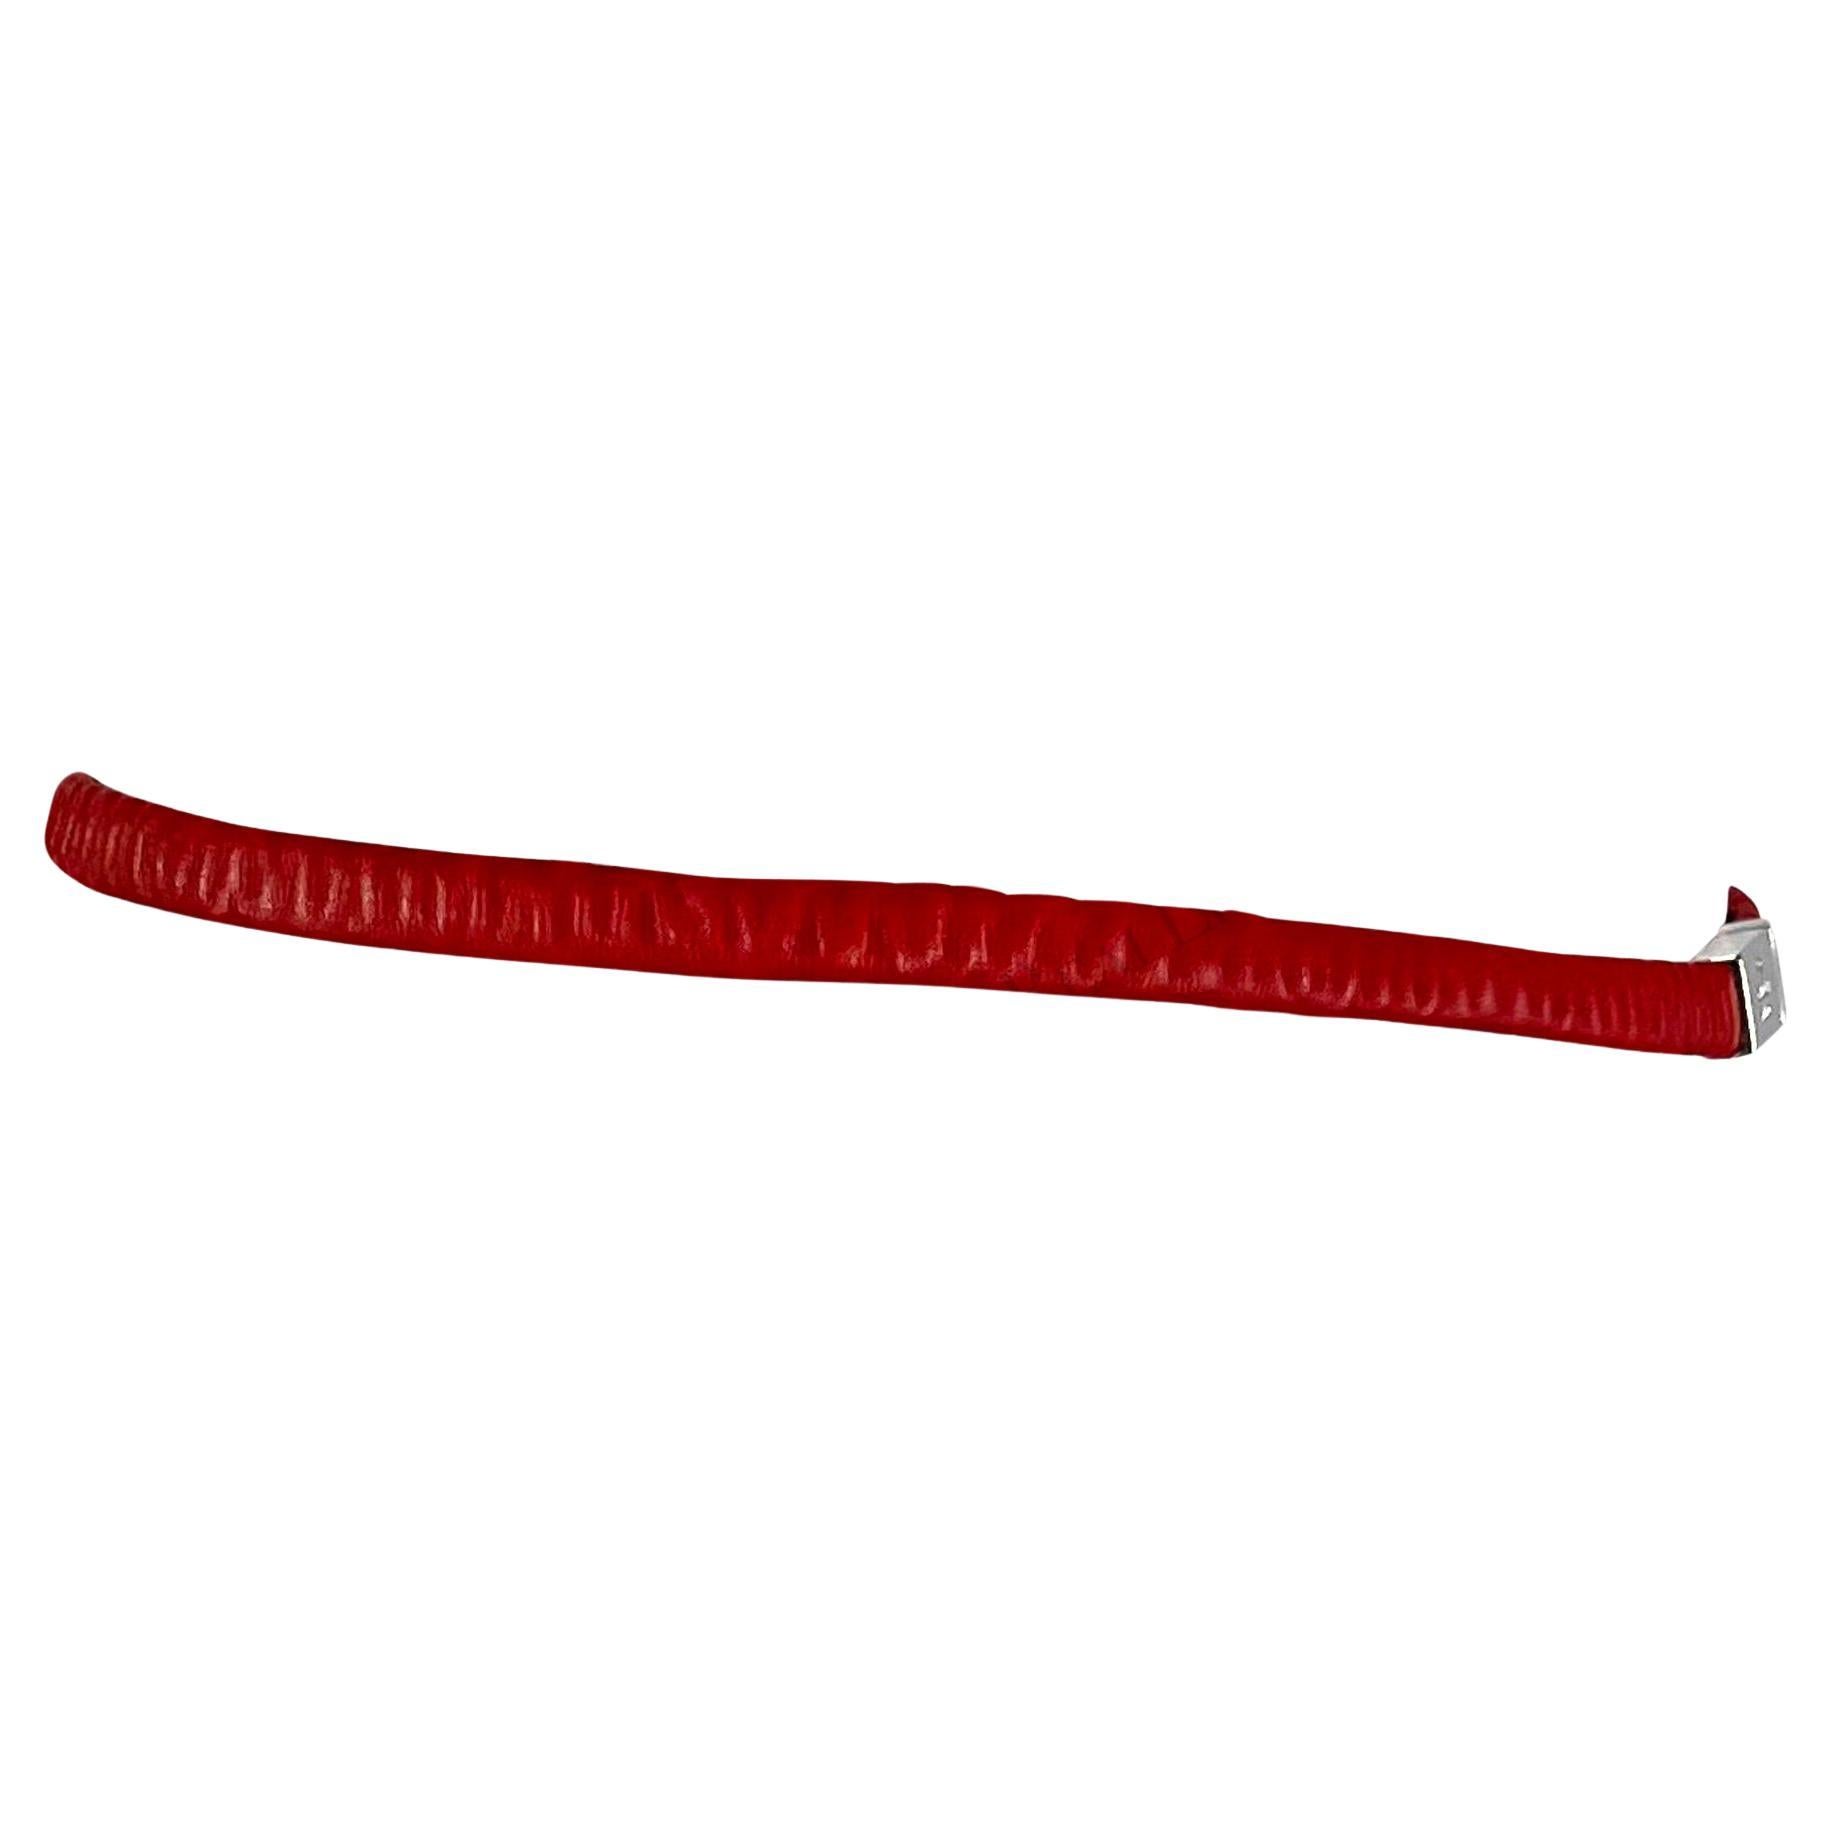 S/S 1999 Gucci by Tom Ford Runway Elasticized Red Leather Logo Thin Belt For Sale 6